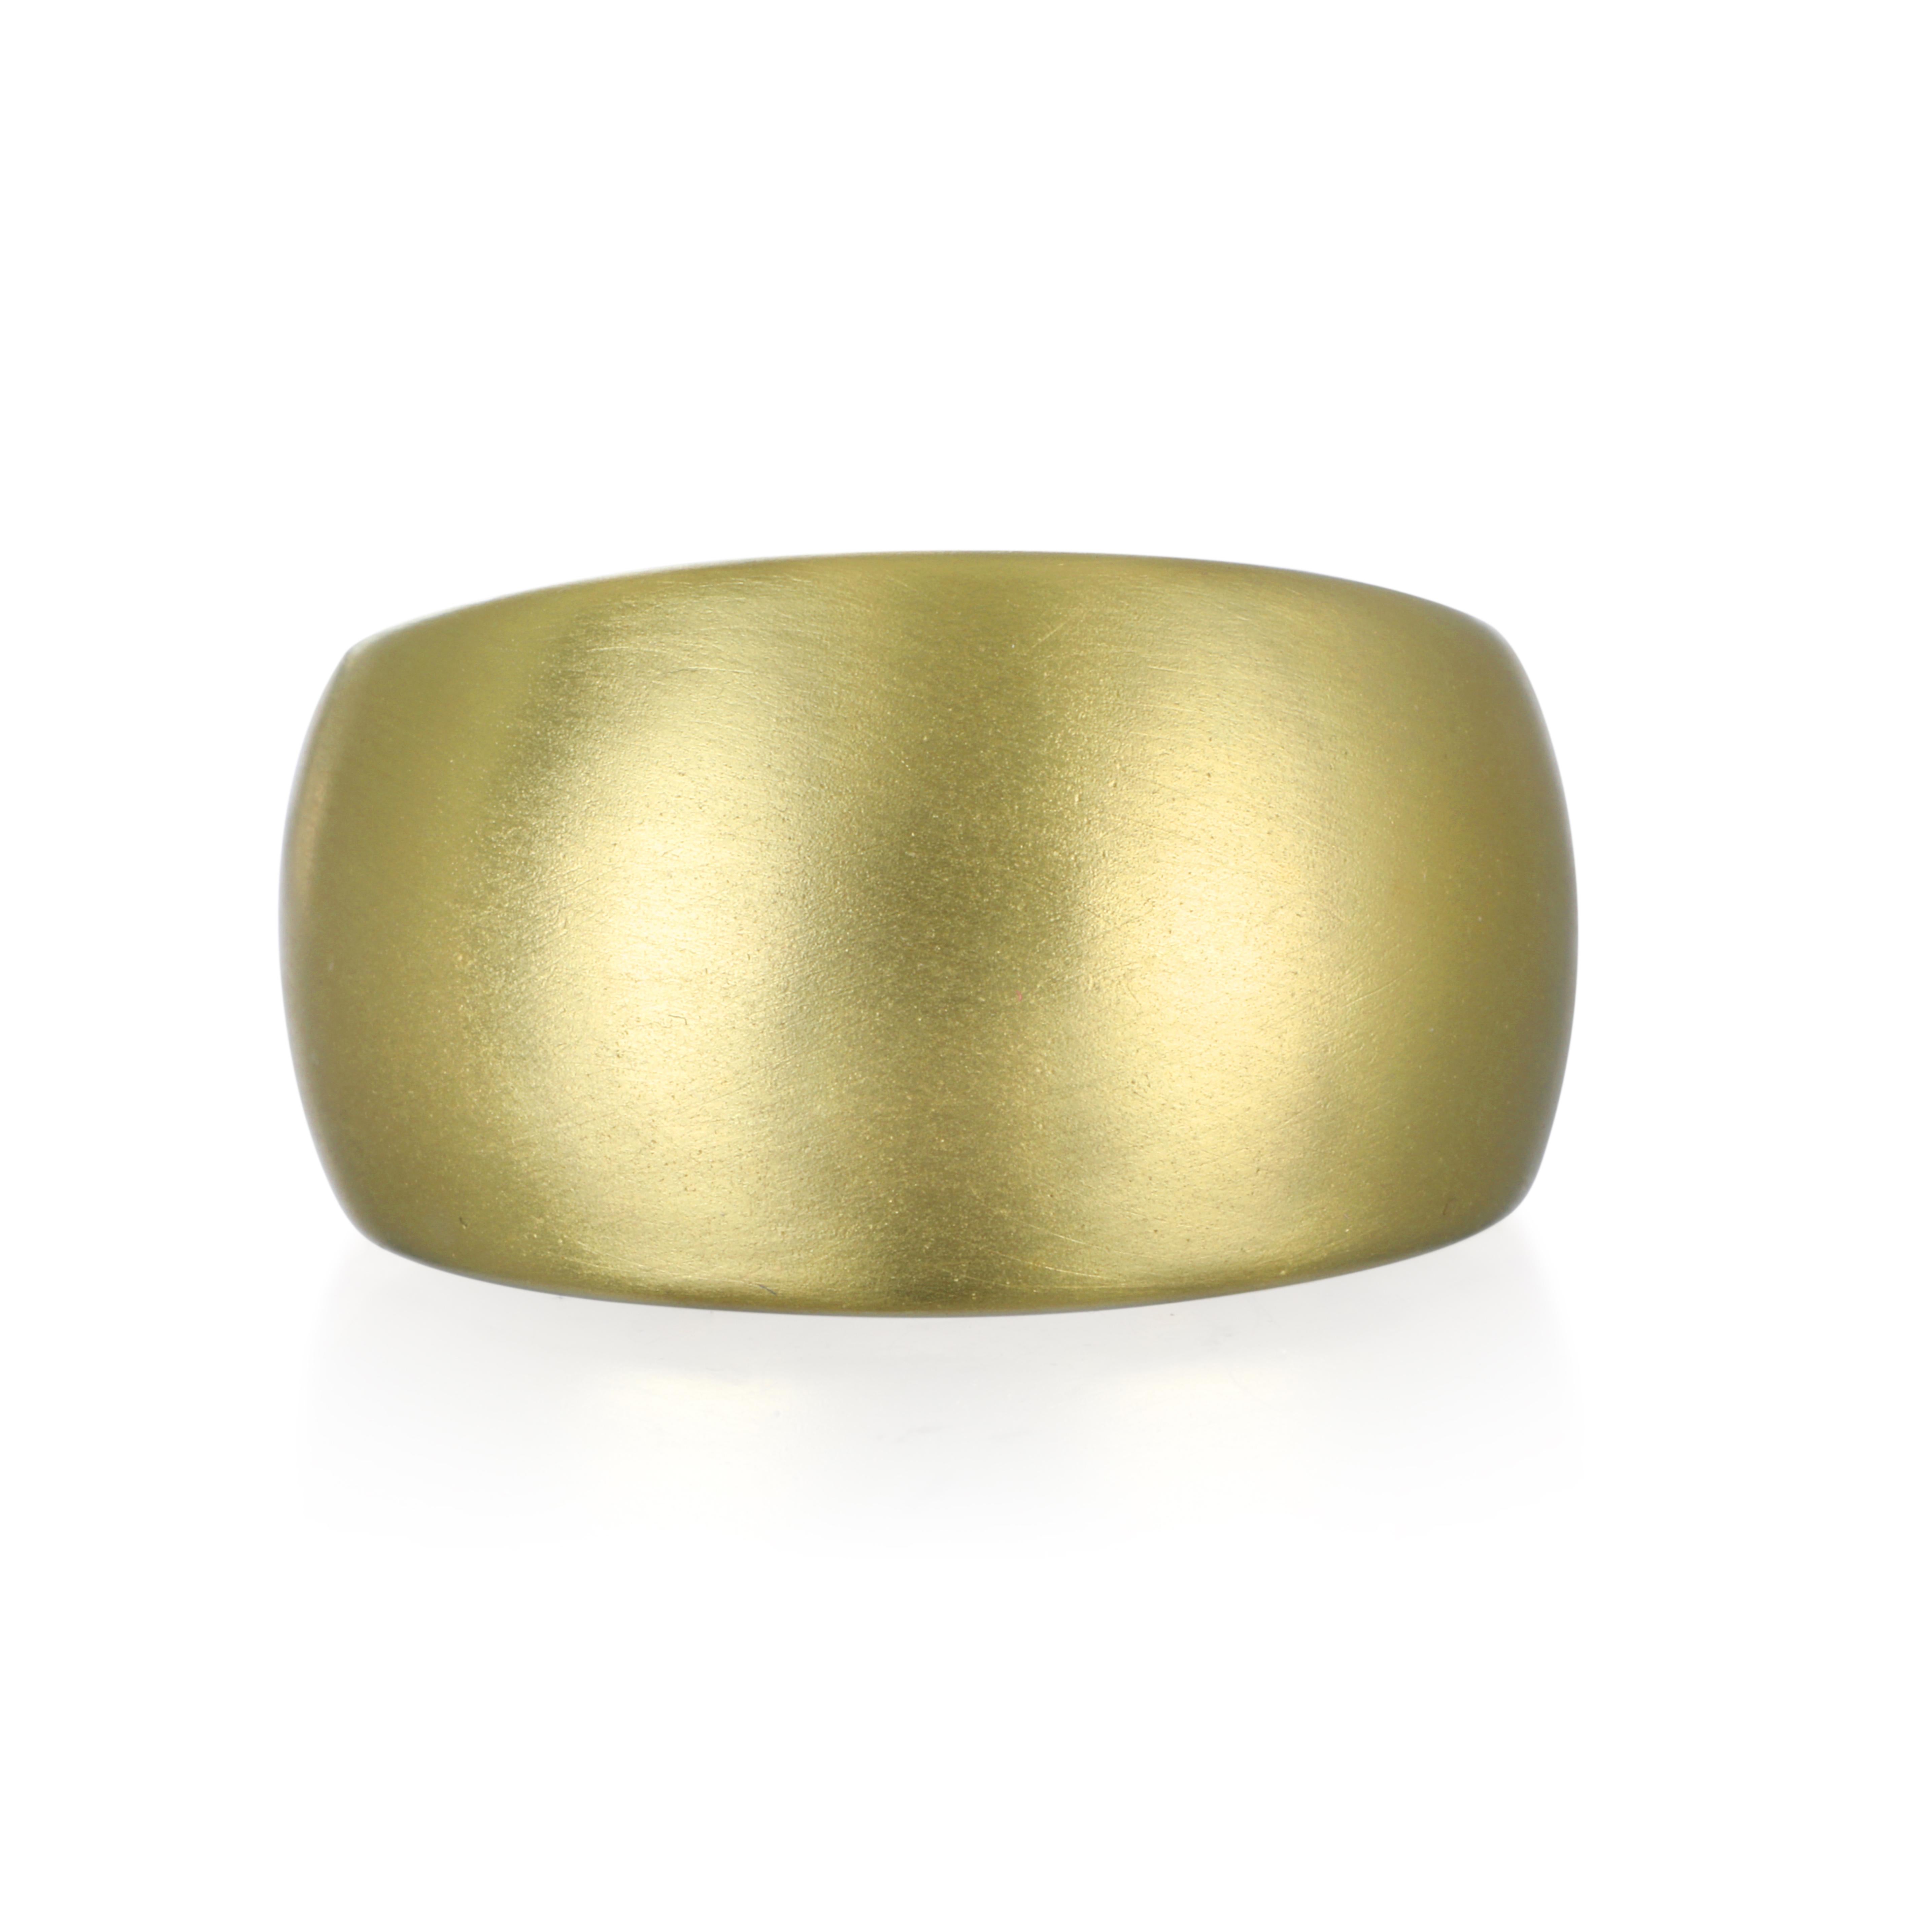 Faye Kim's updated version of the classic wide gold band in 18k matte gold is modern and fresh.  Sport a bold look with comfort, style, and elegance!

Size 6.5
Tapered: 14 x 7 MM